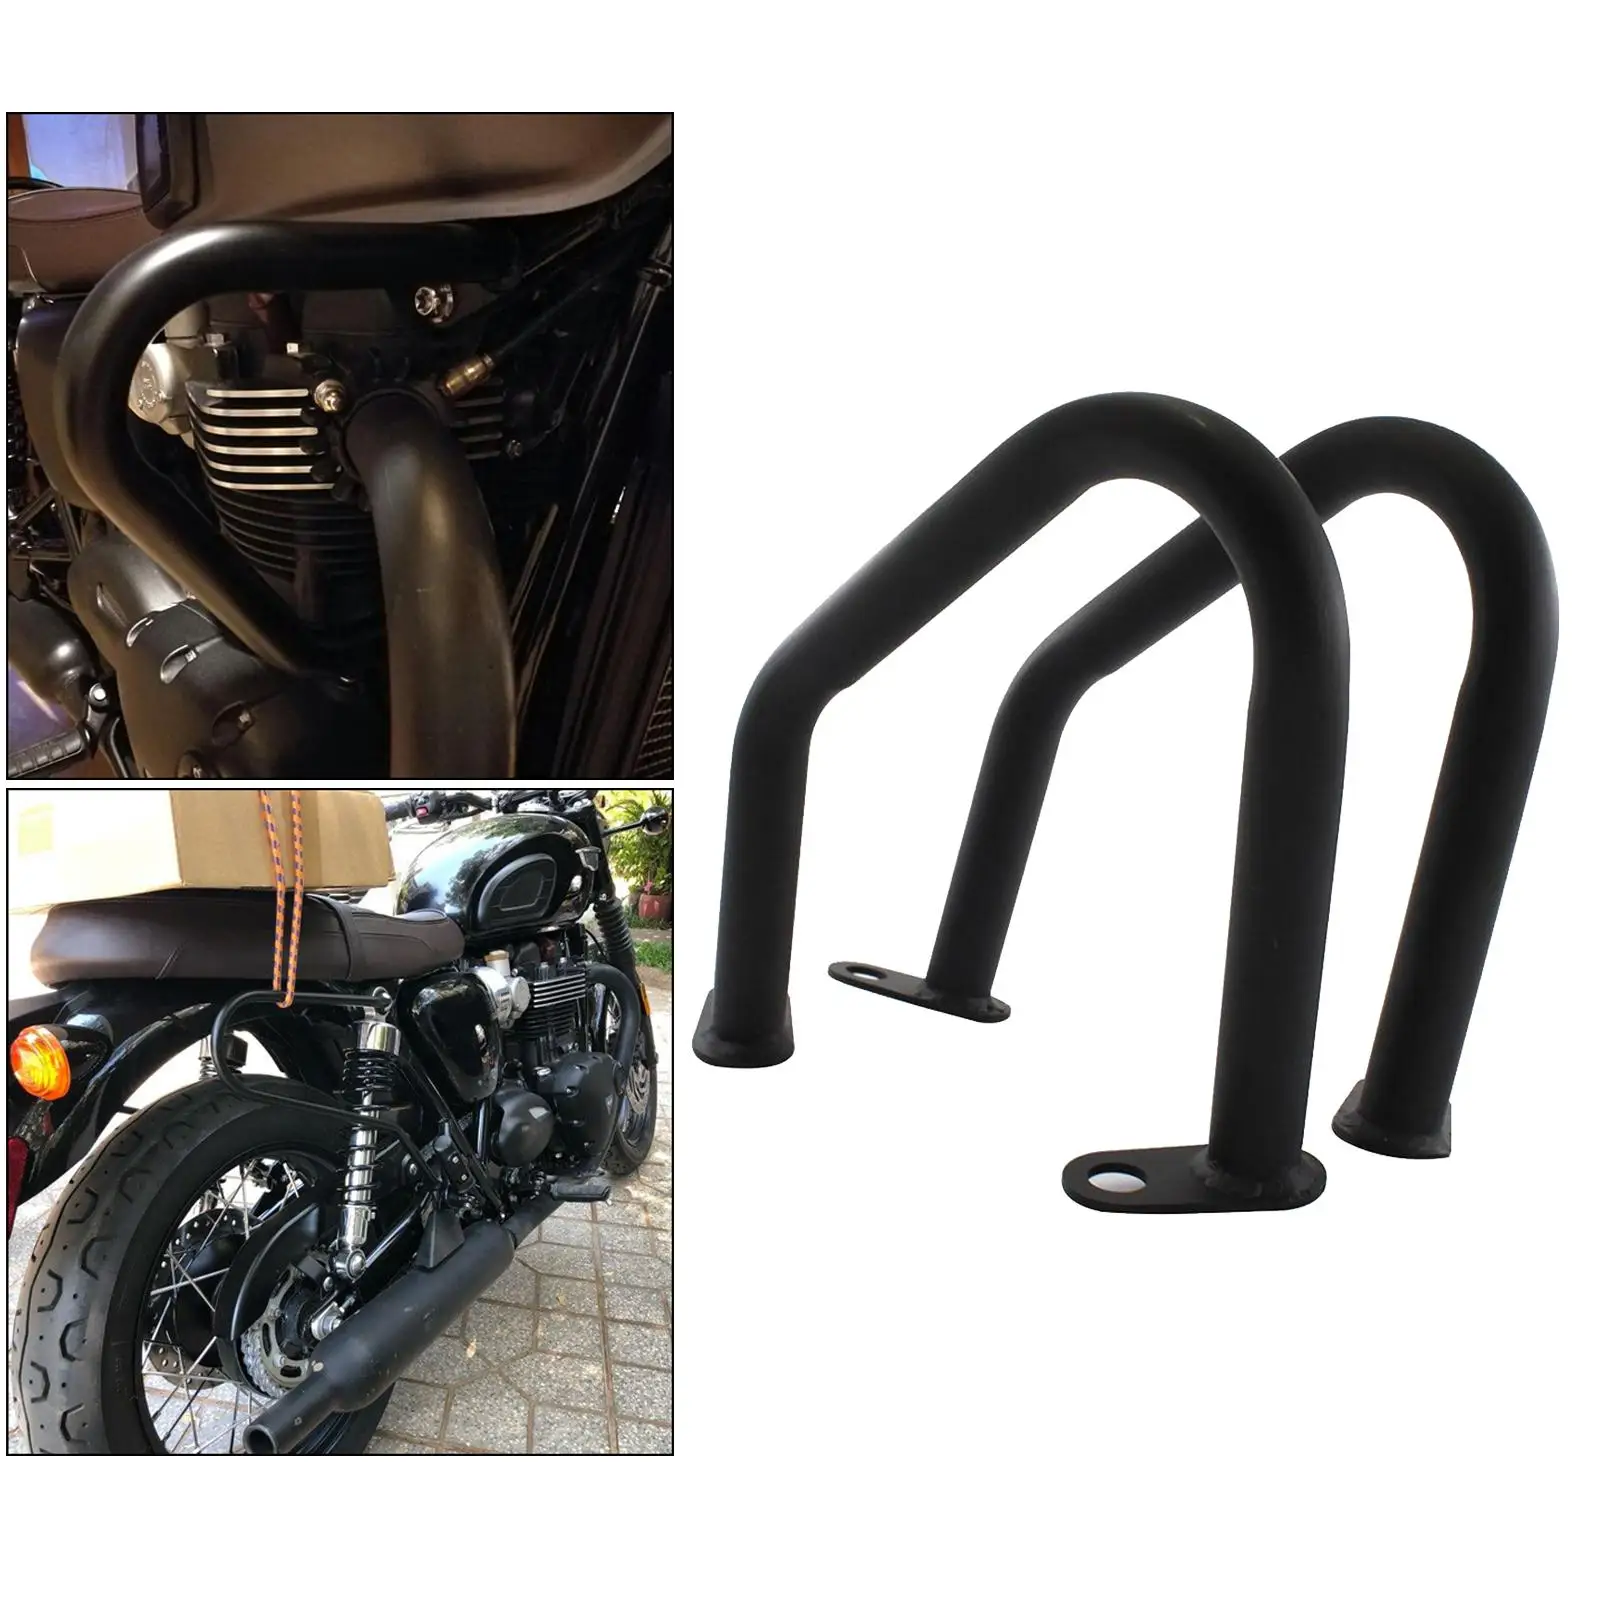 2pcs Black Motorcycle   Engine Guard   Replaces with 4pieces Screw  2016-2019